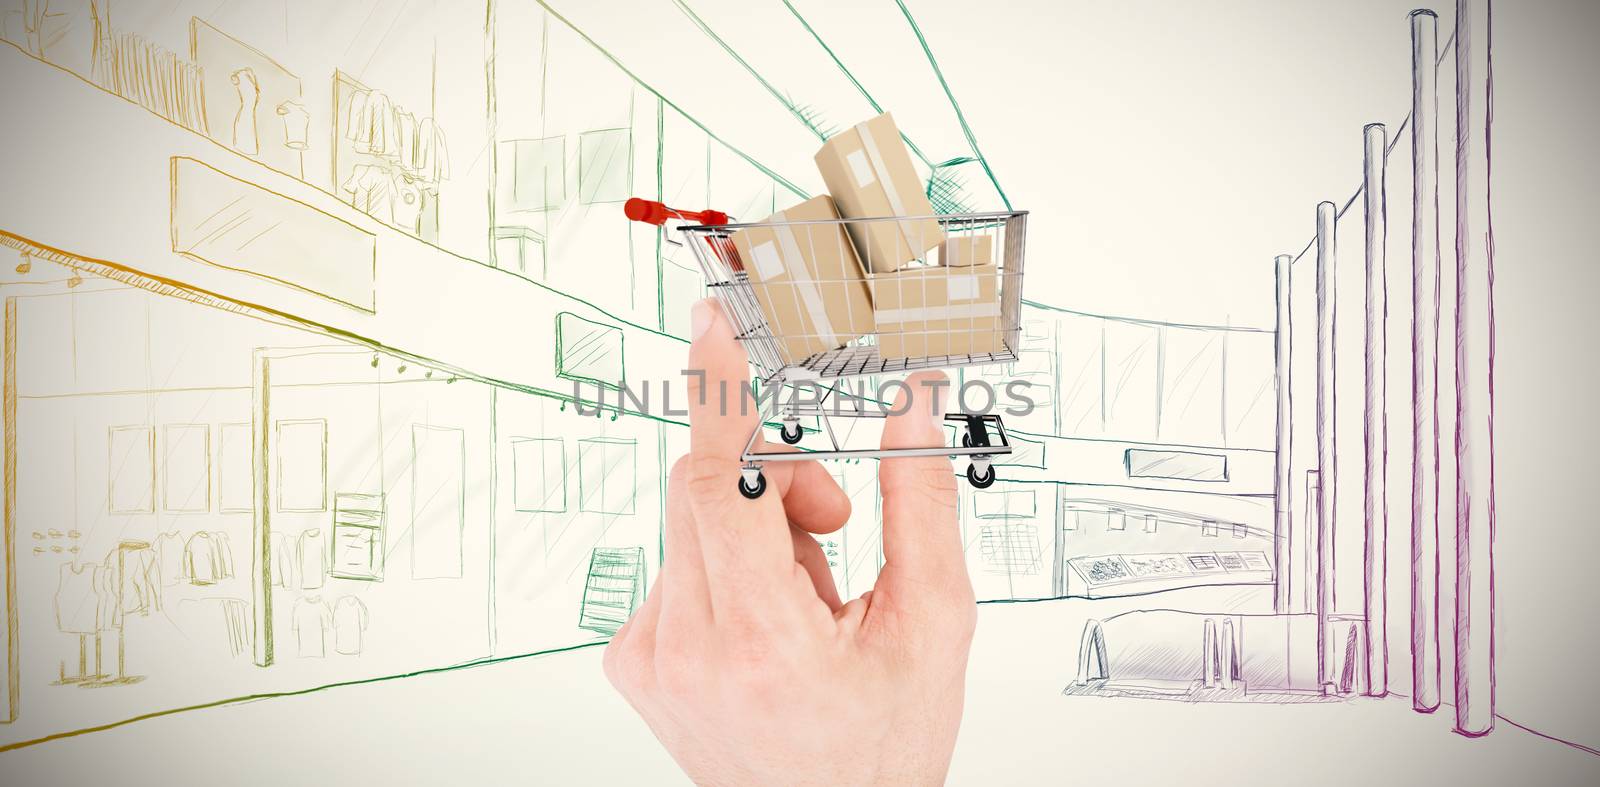 Hand showing house against online shopping concept